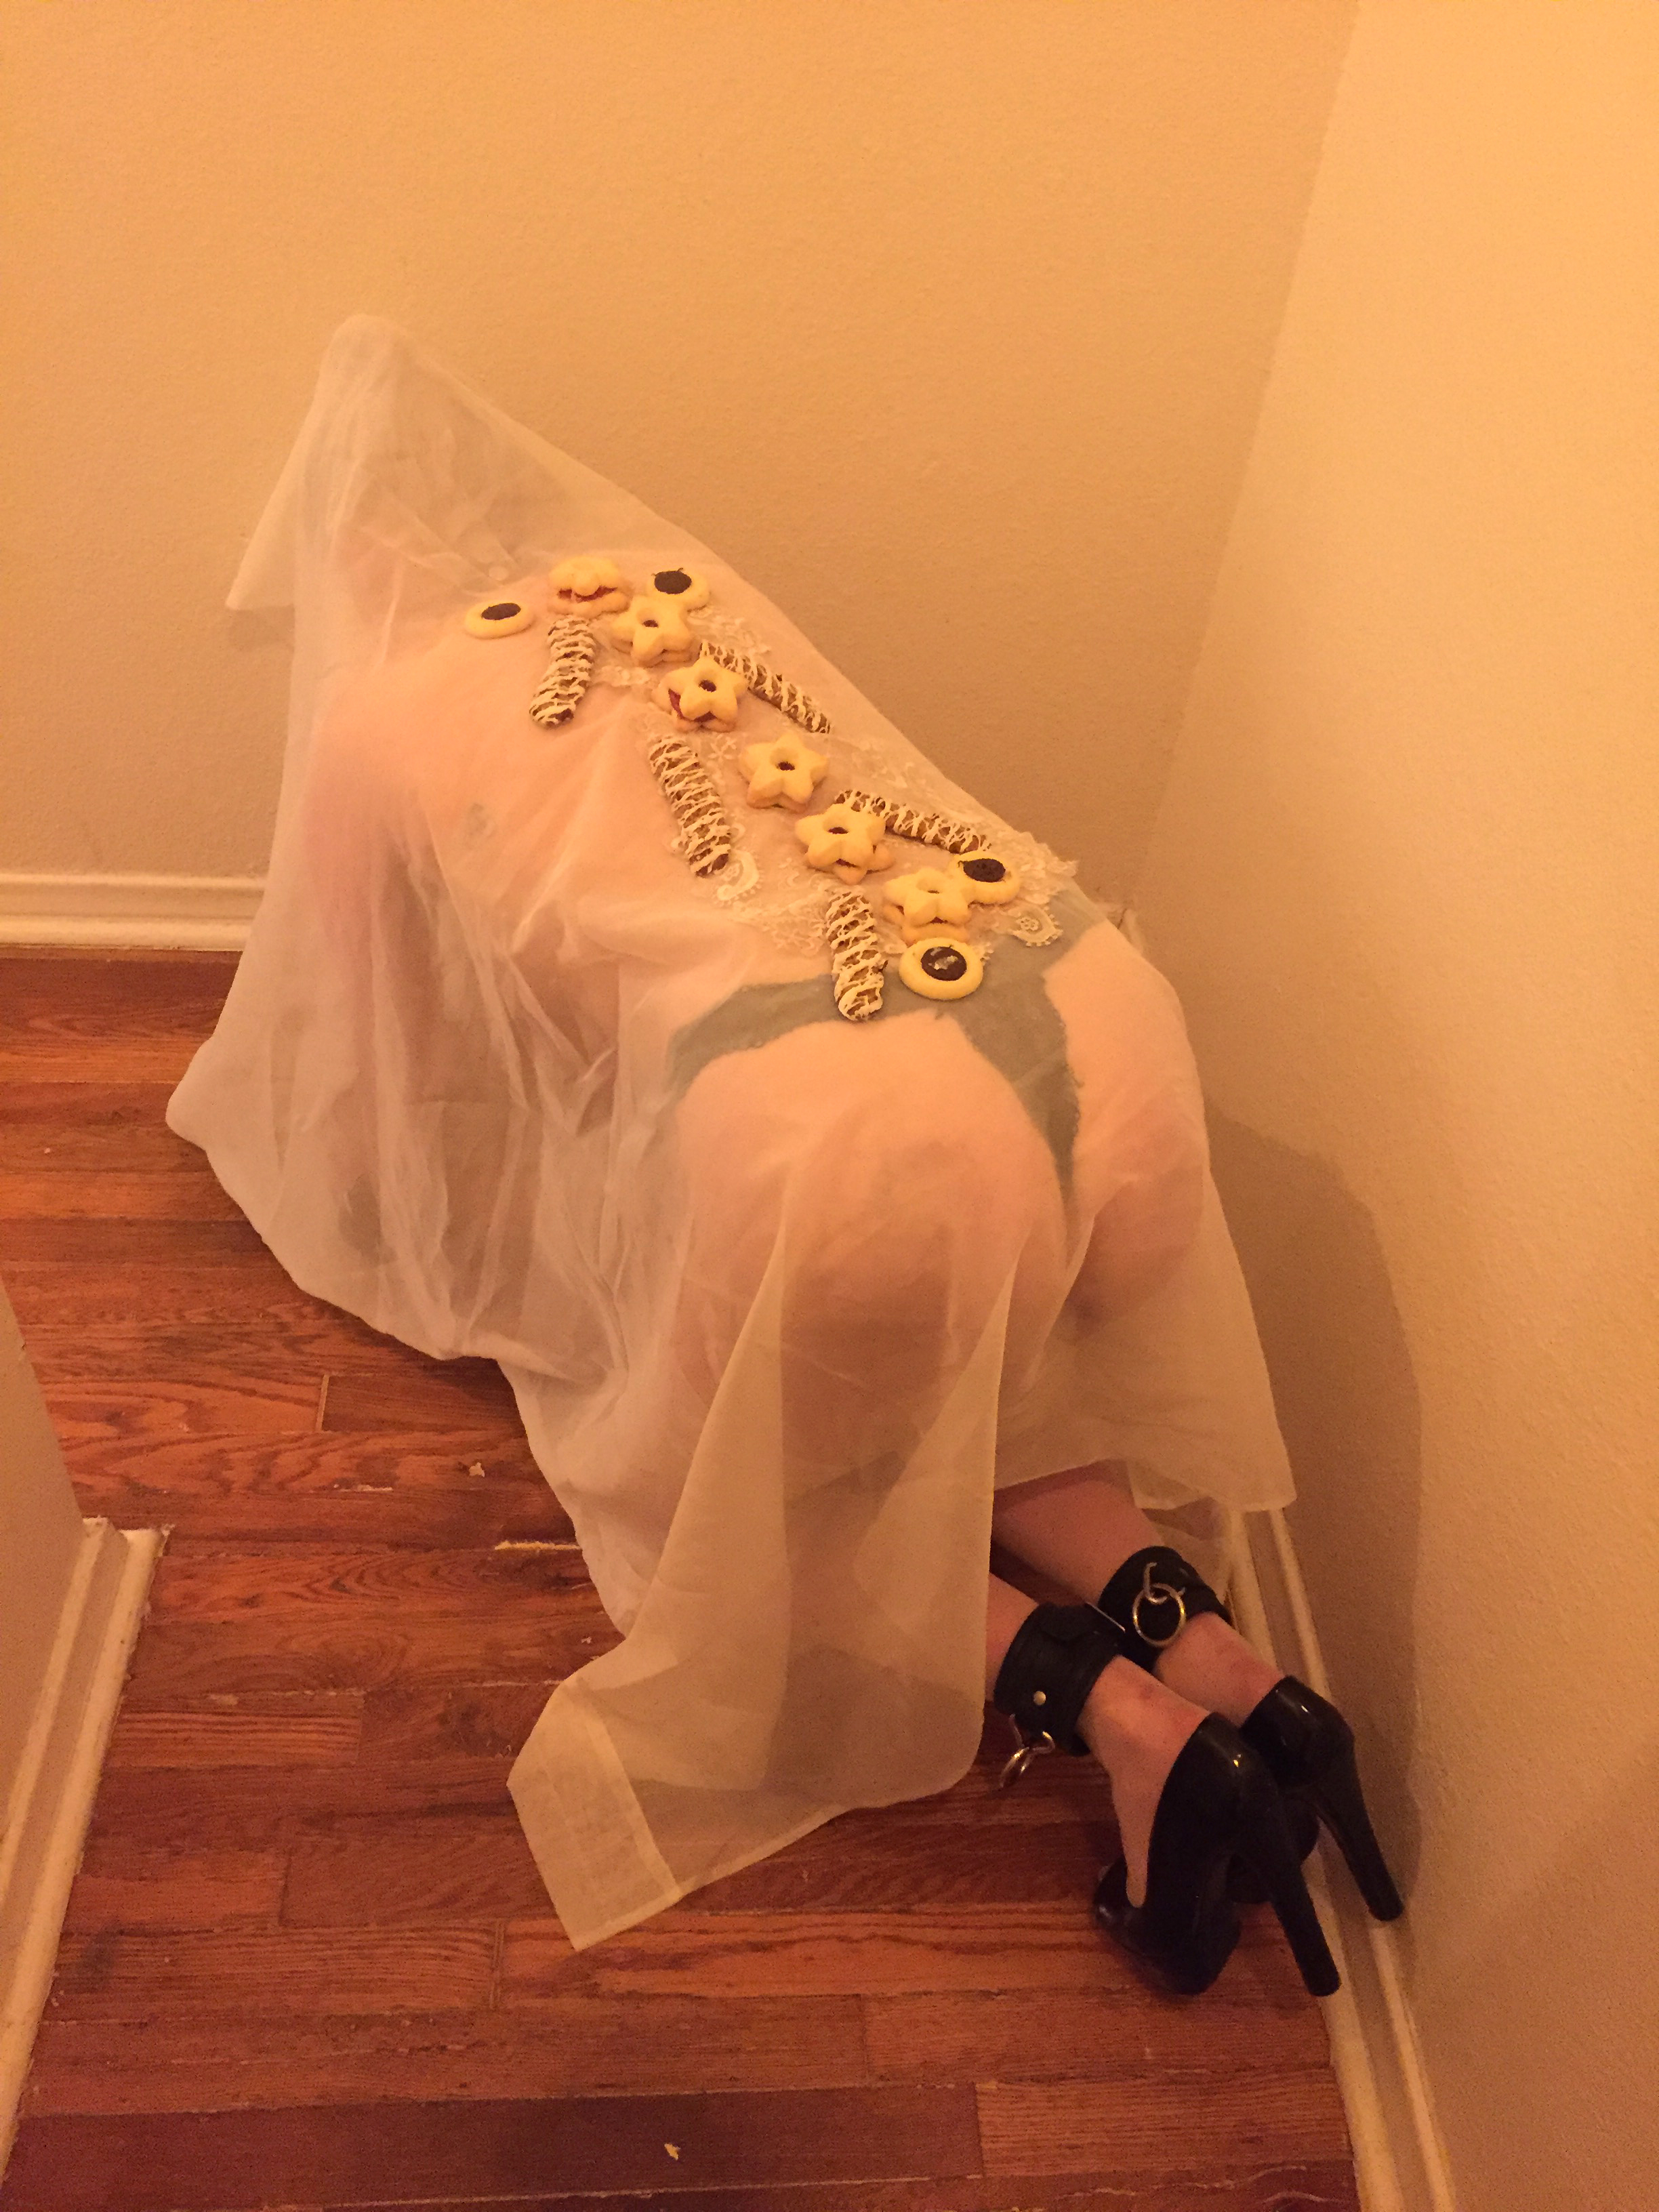 Ariel view of a girl on all fours with a sheer sheet over her and cookies on her back in a narrow hallway in warm light